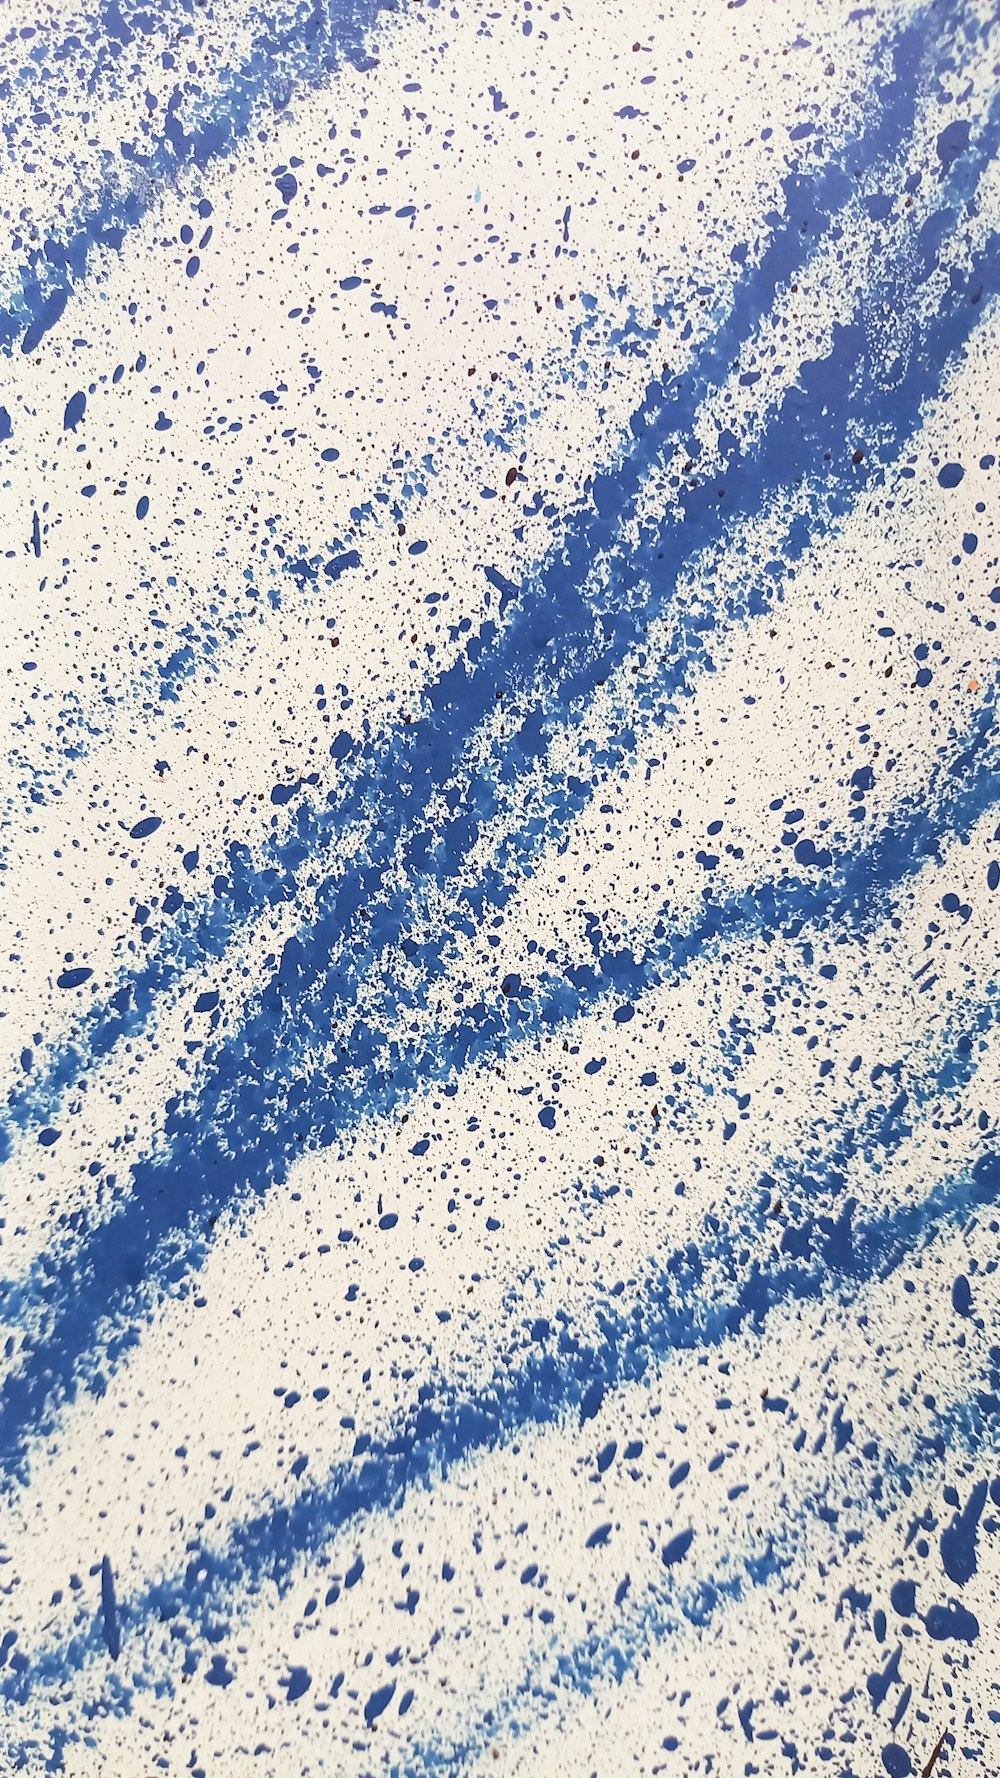 a snow covered ground with blue lines in the snow